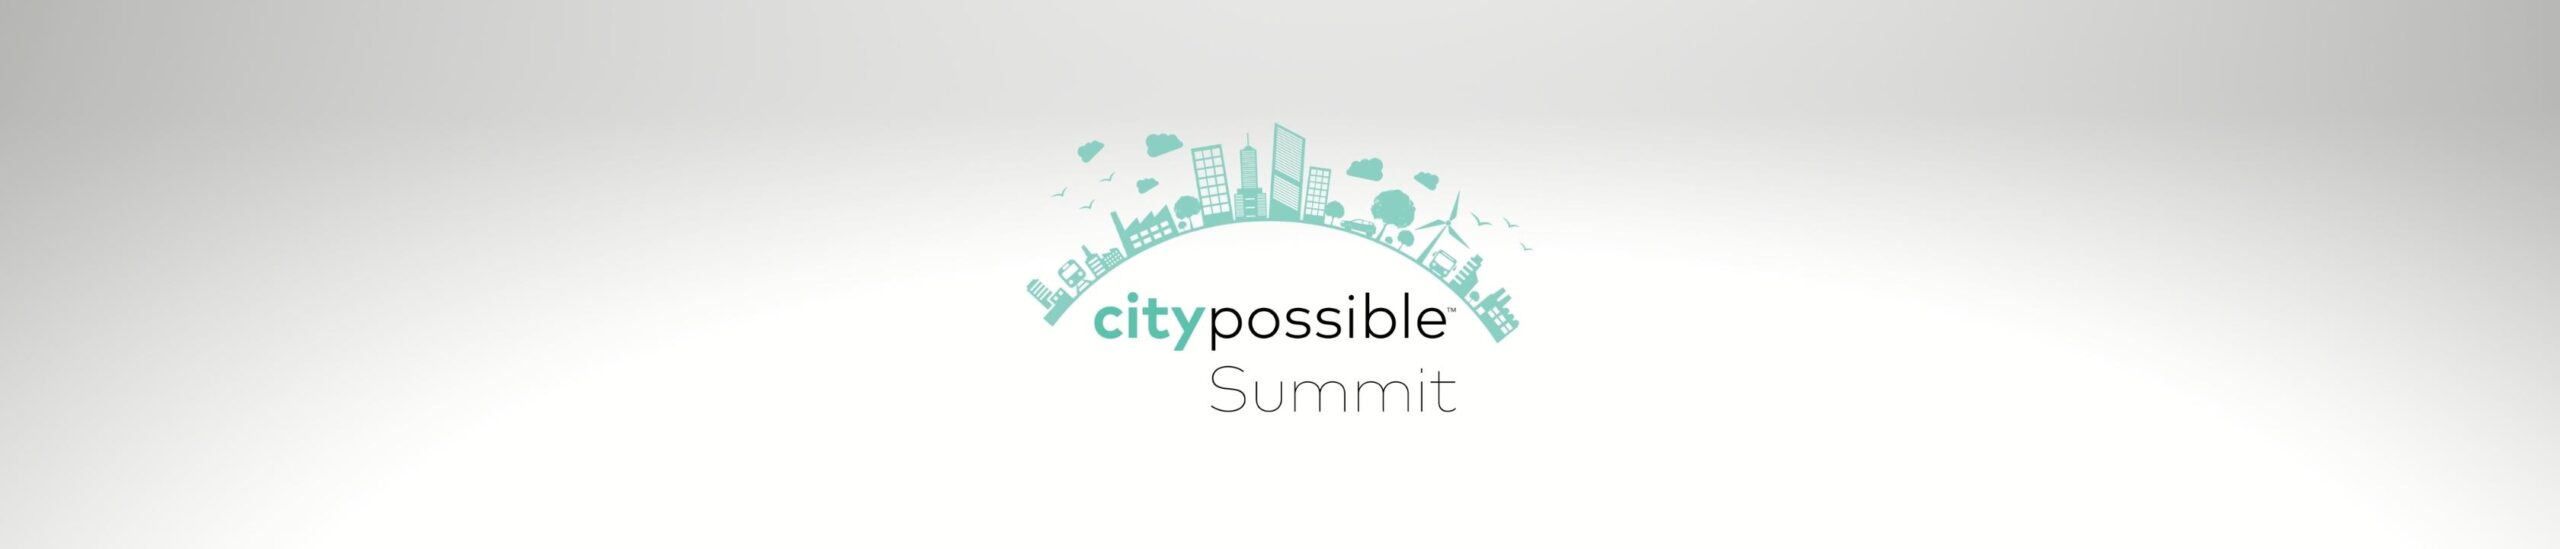 City Possible Summit 2021. Cities Surviving and Flourishing